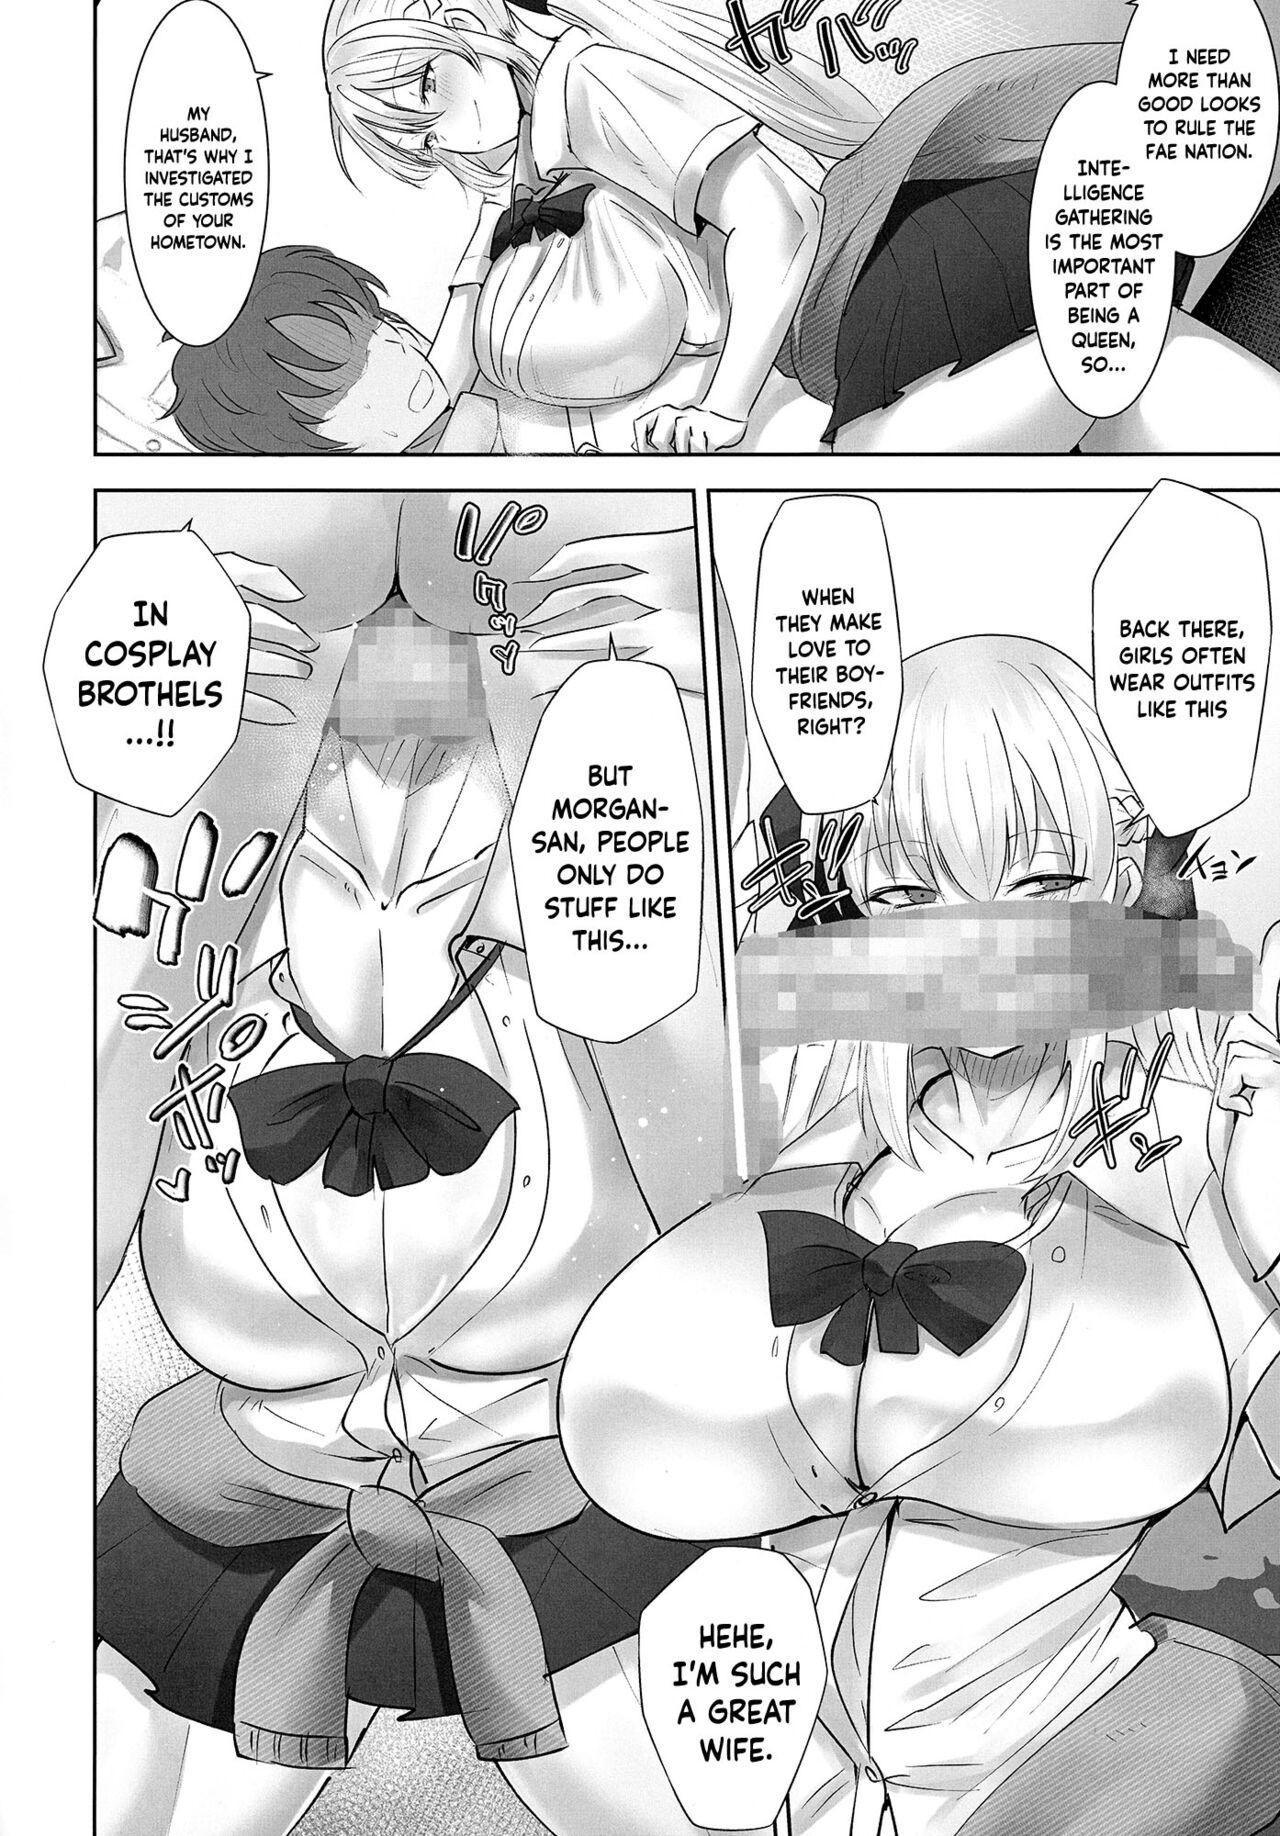 Spying Youseisou Shingeki - Fate grand order Celebrity Porn - Page 5